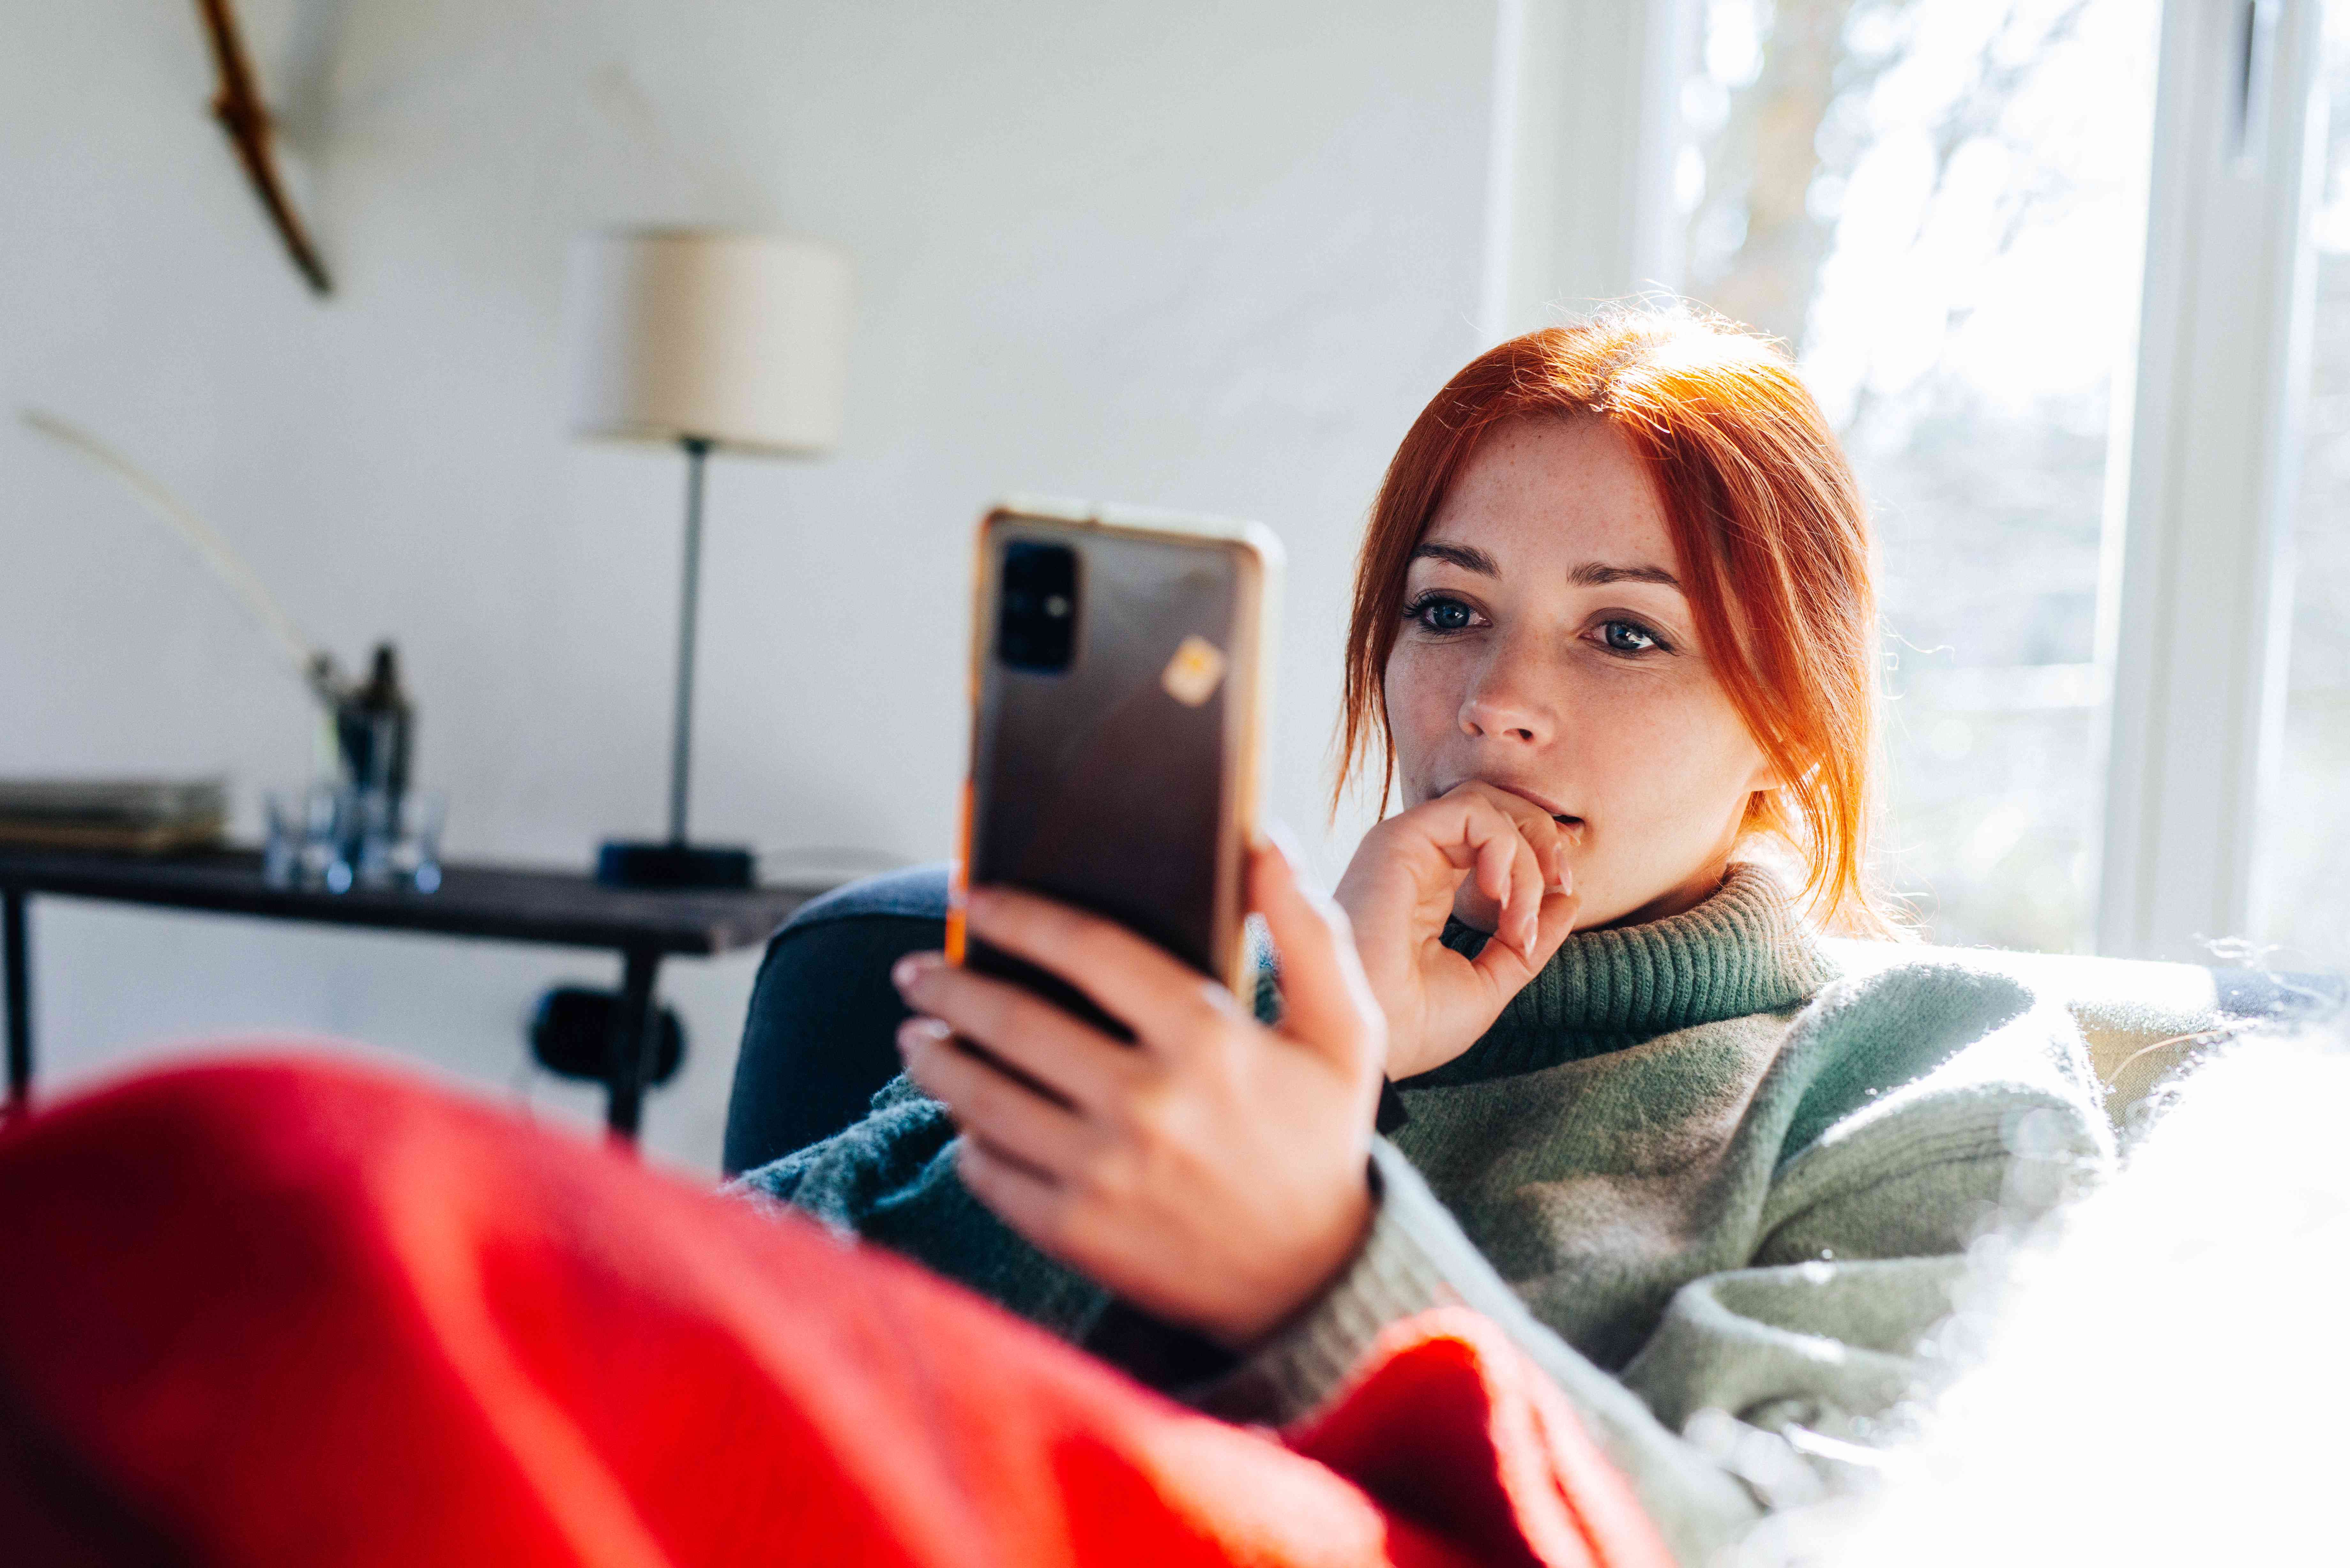 Young woman at home intently pondering something on her smartphone